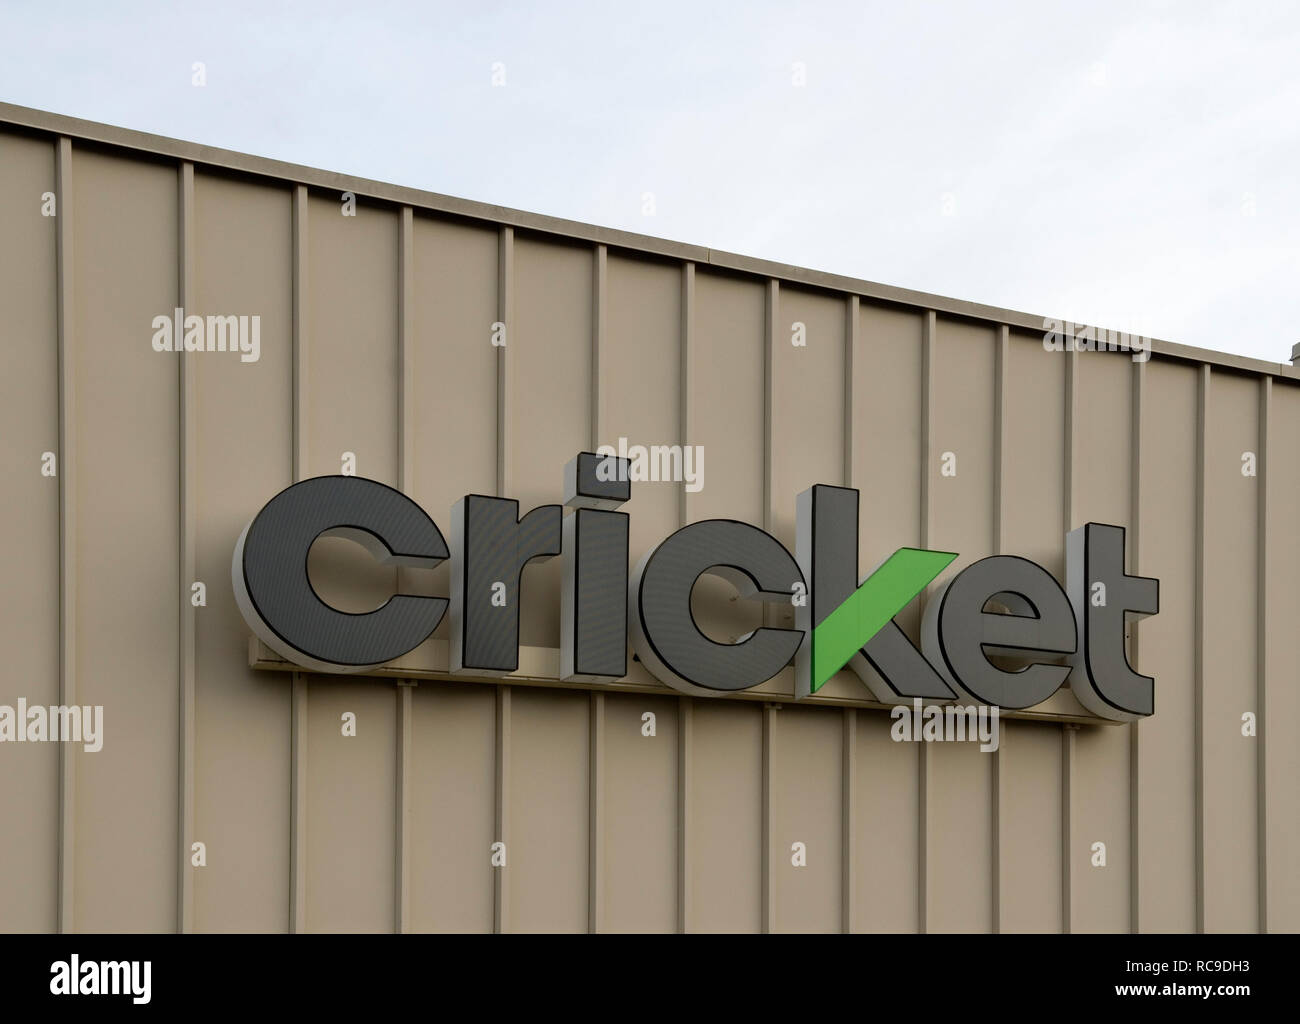 Cricket Cellphone Service Retail Store Sign USA Stock Photo